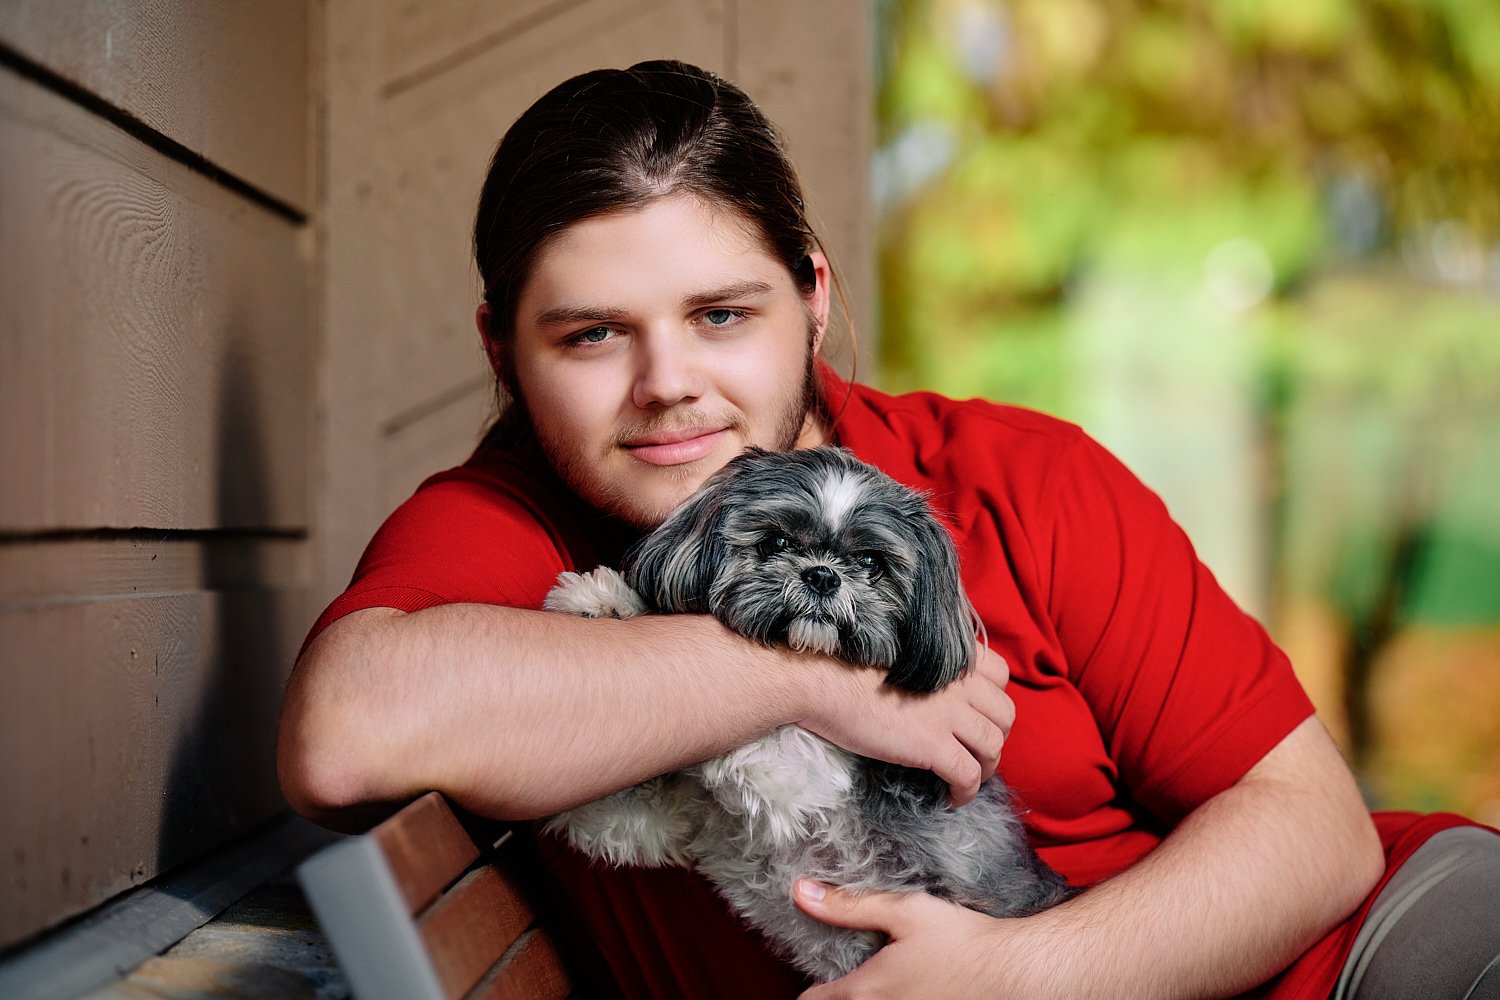  Zach Elkin of SA is posing for high school senior portraits in his family home in Sewickley Heights. He looks handsome in suit, polo shirt and playing with his dogs - in the backyard and in the house 